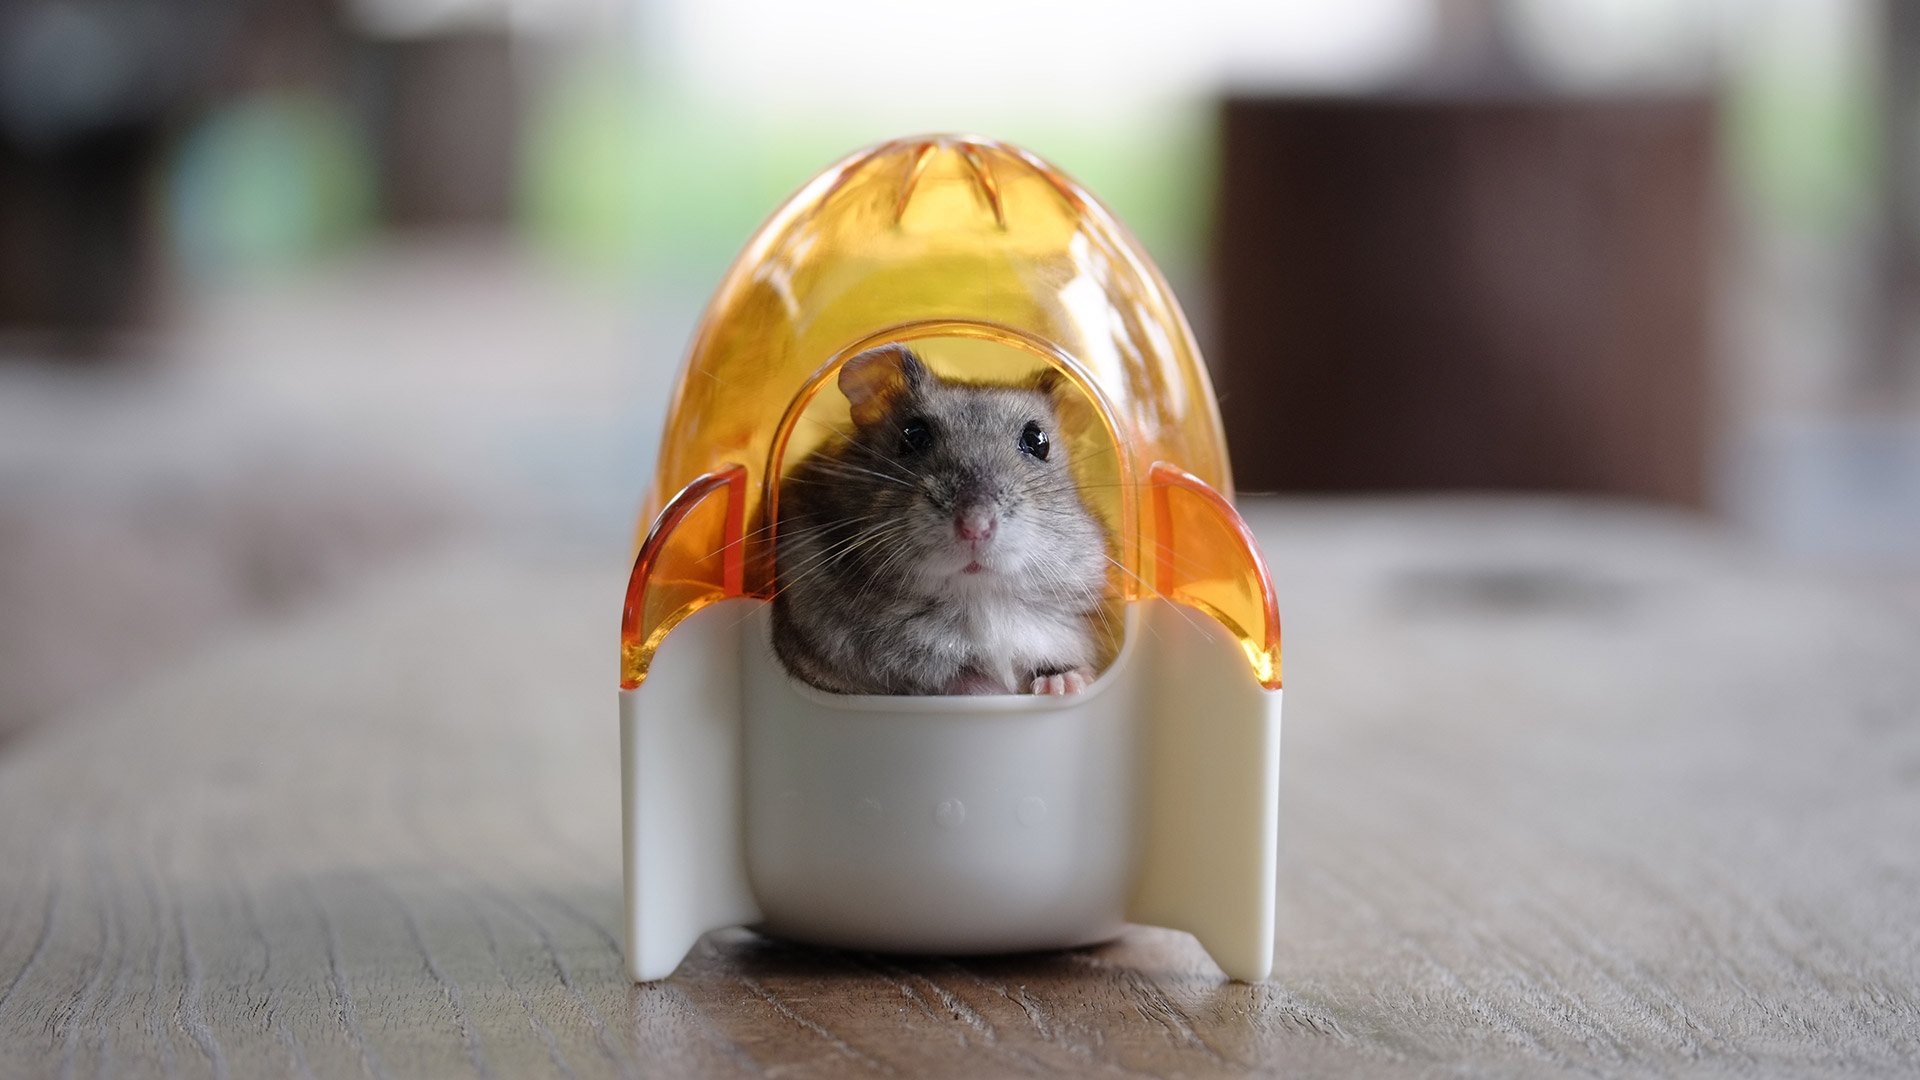 Hamster in a toy space rocket